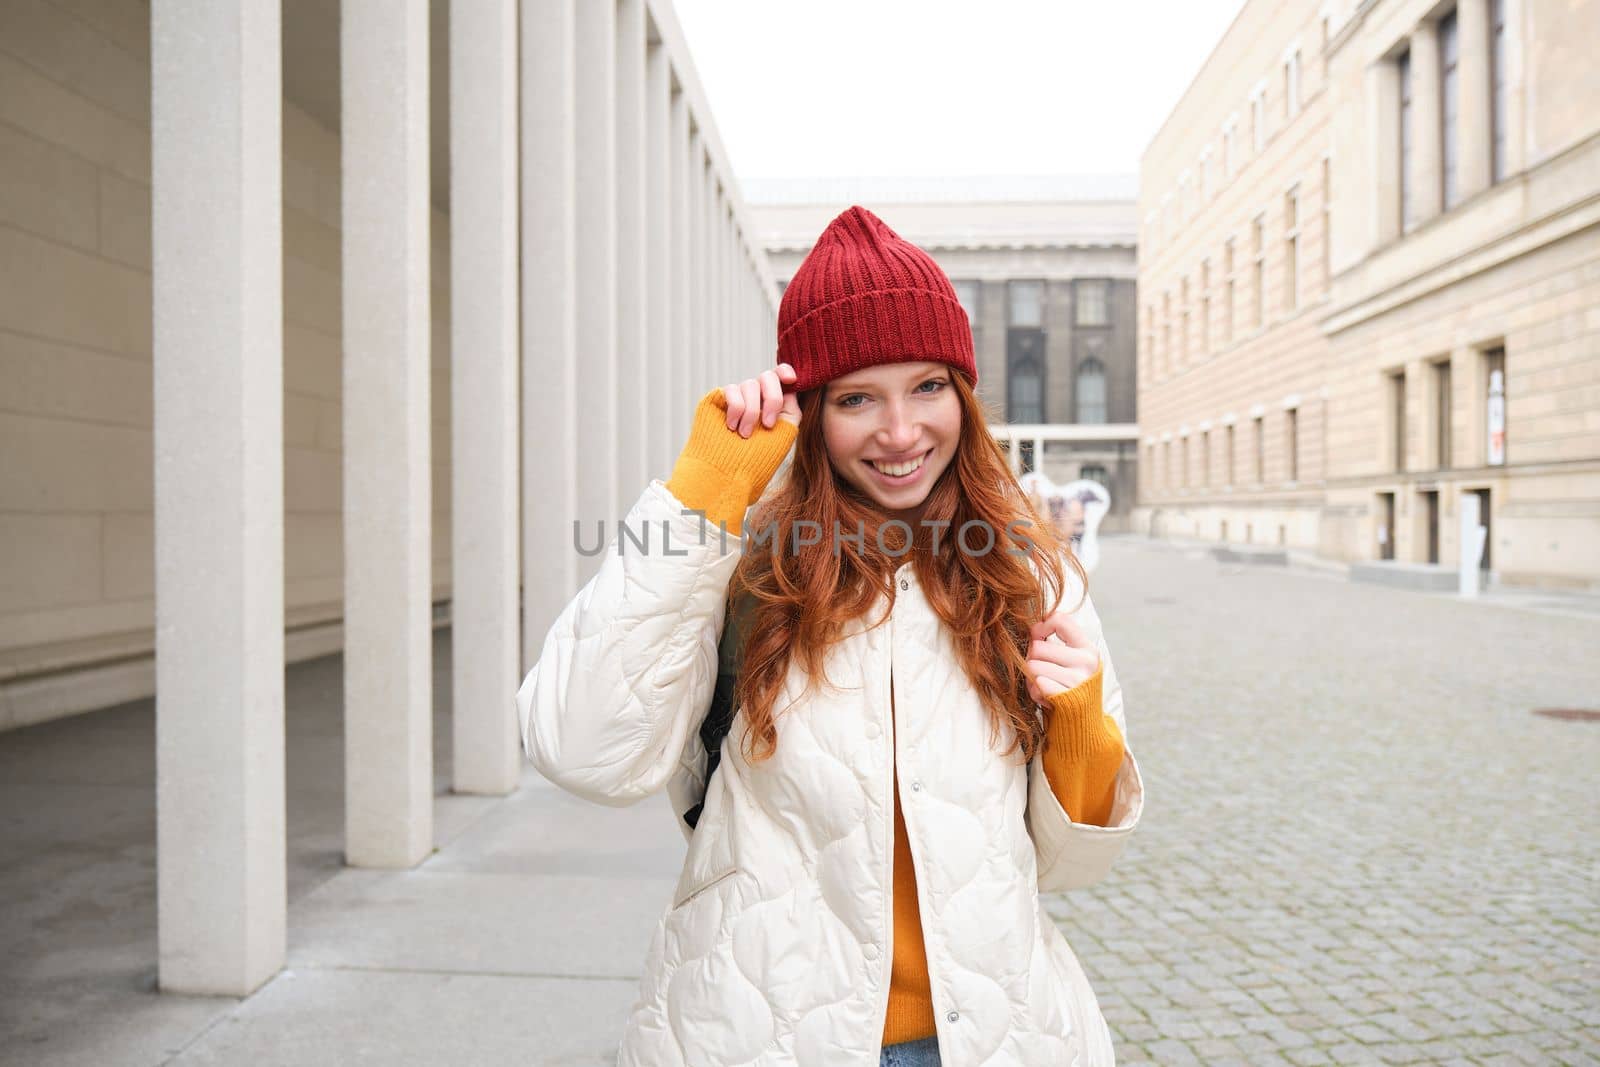 Happy redhead girl, tourist going around town, exploring sighsteeing places in city, backpacking around europe, enjoys travelling.